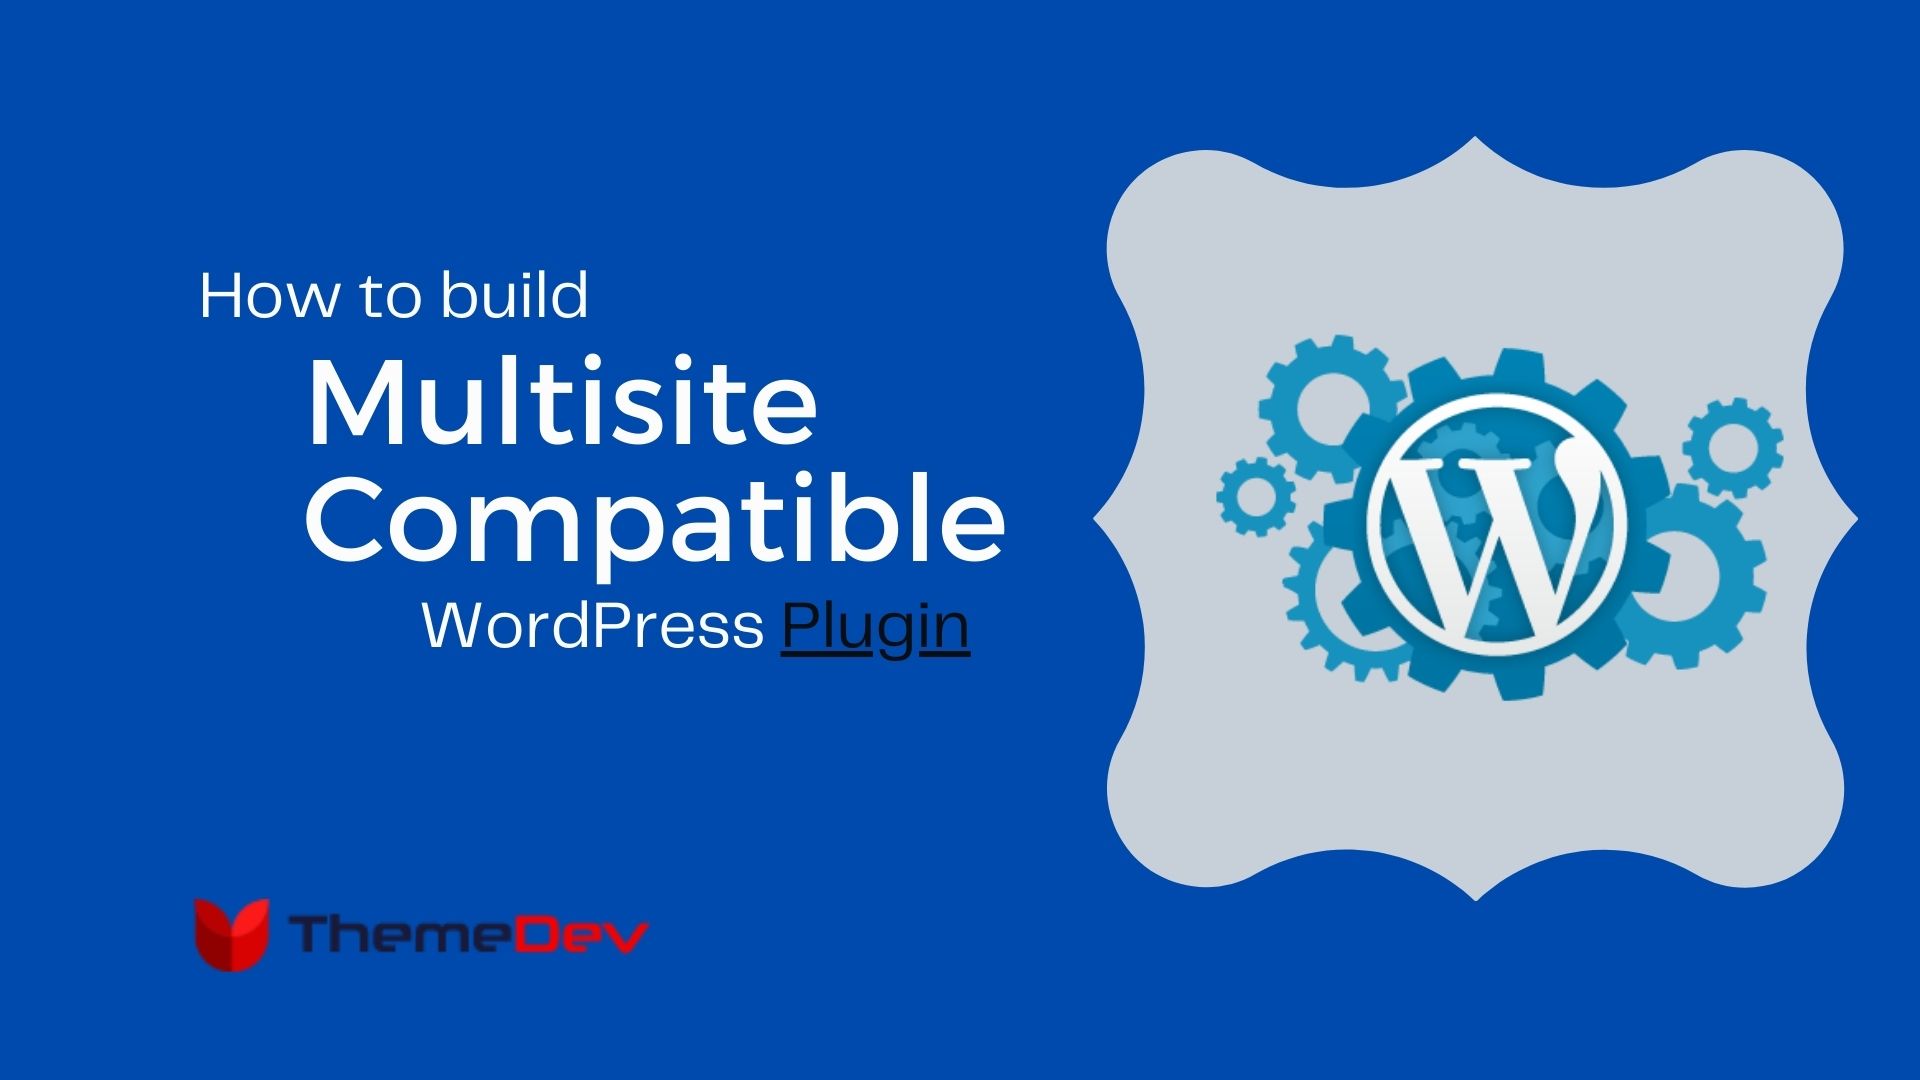 How to Build a Multisite Compatible WordPress Plugin